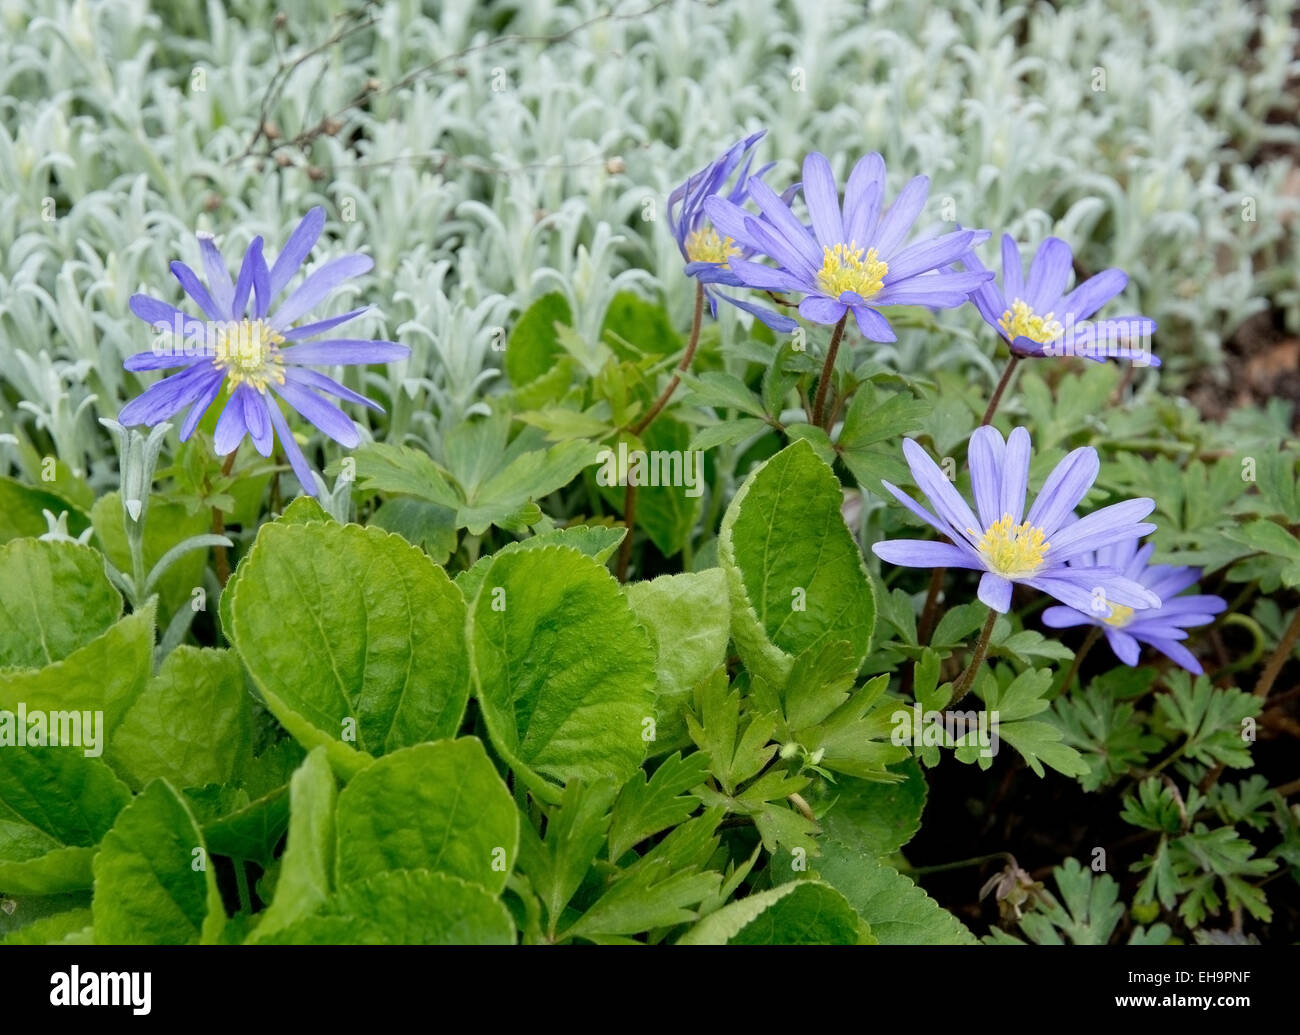 Purple rocky daisy flower garden composition with green leaves in different hues. Stock Photo